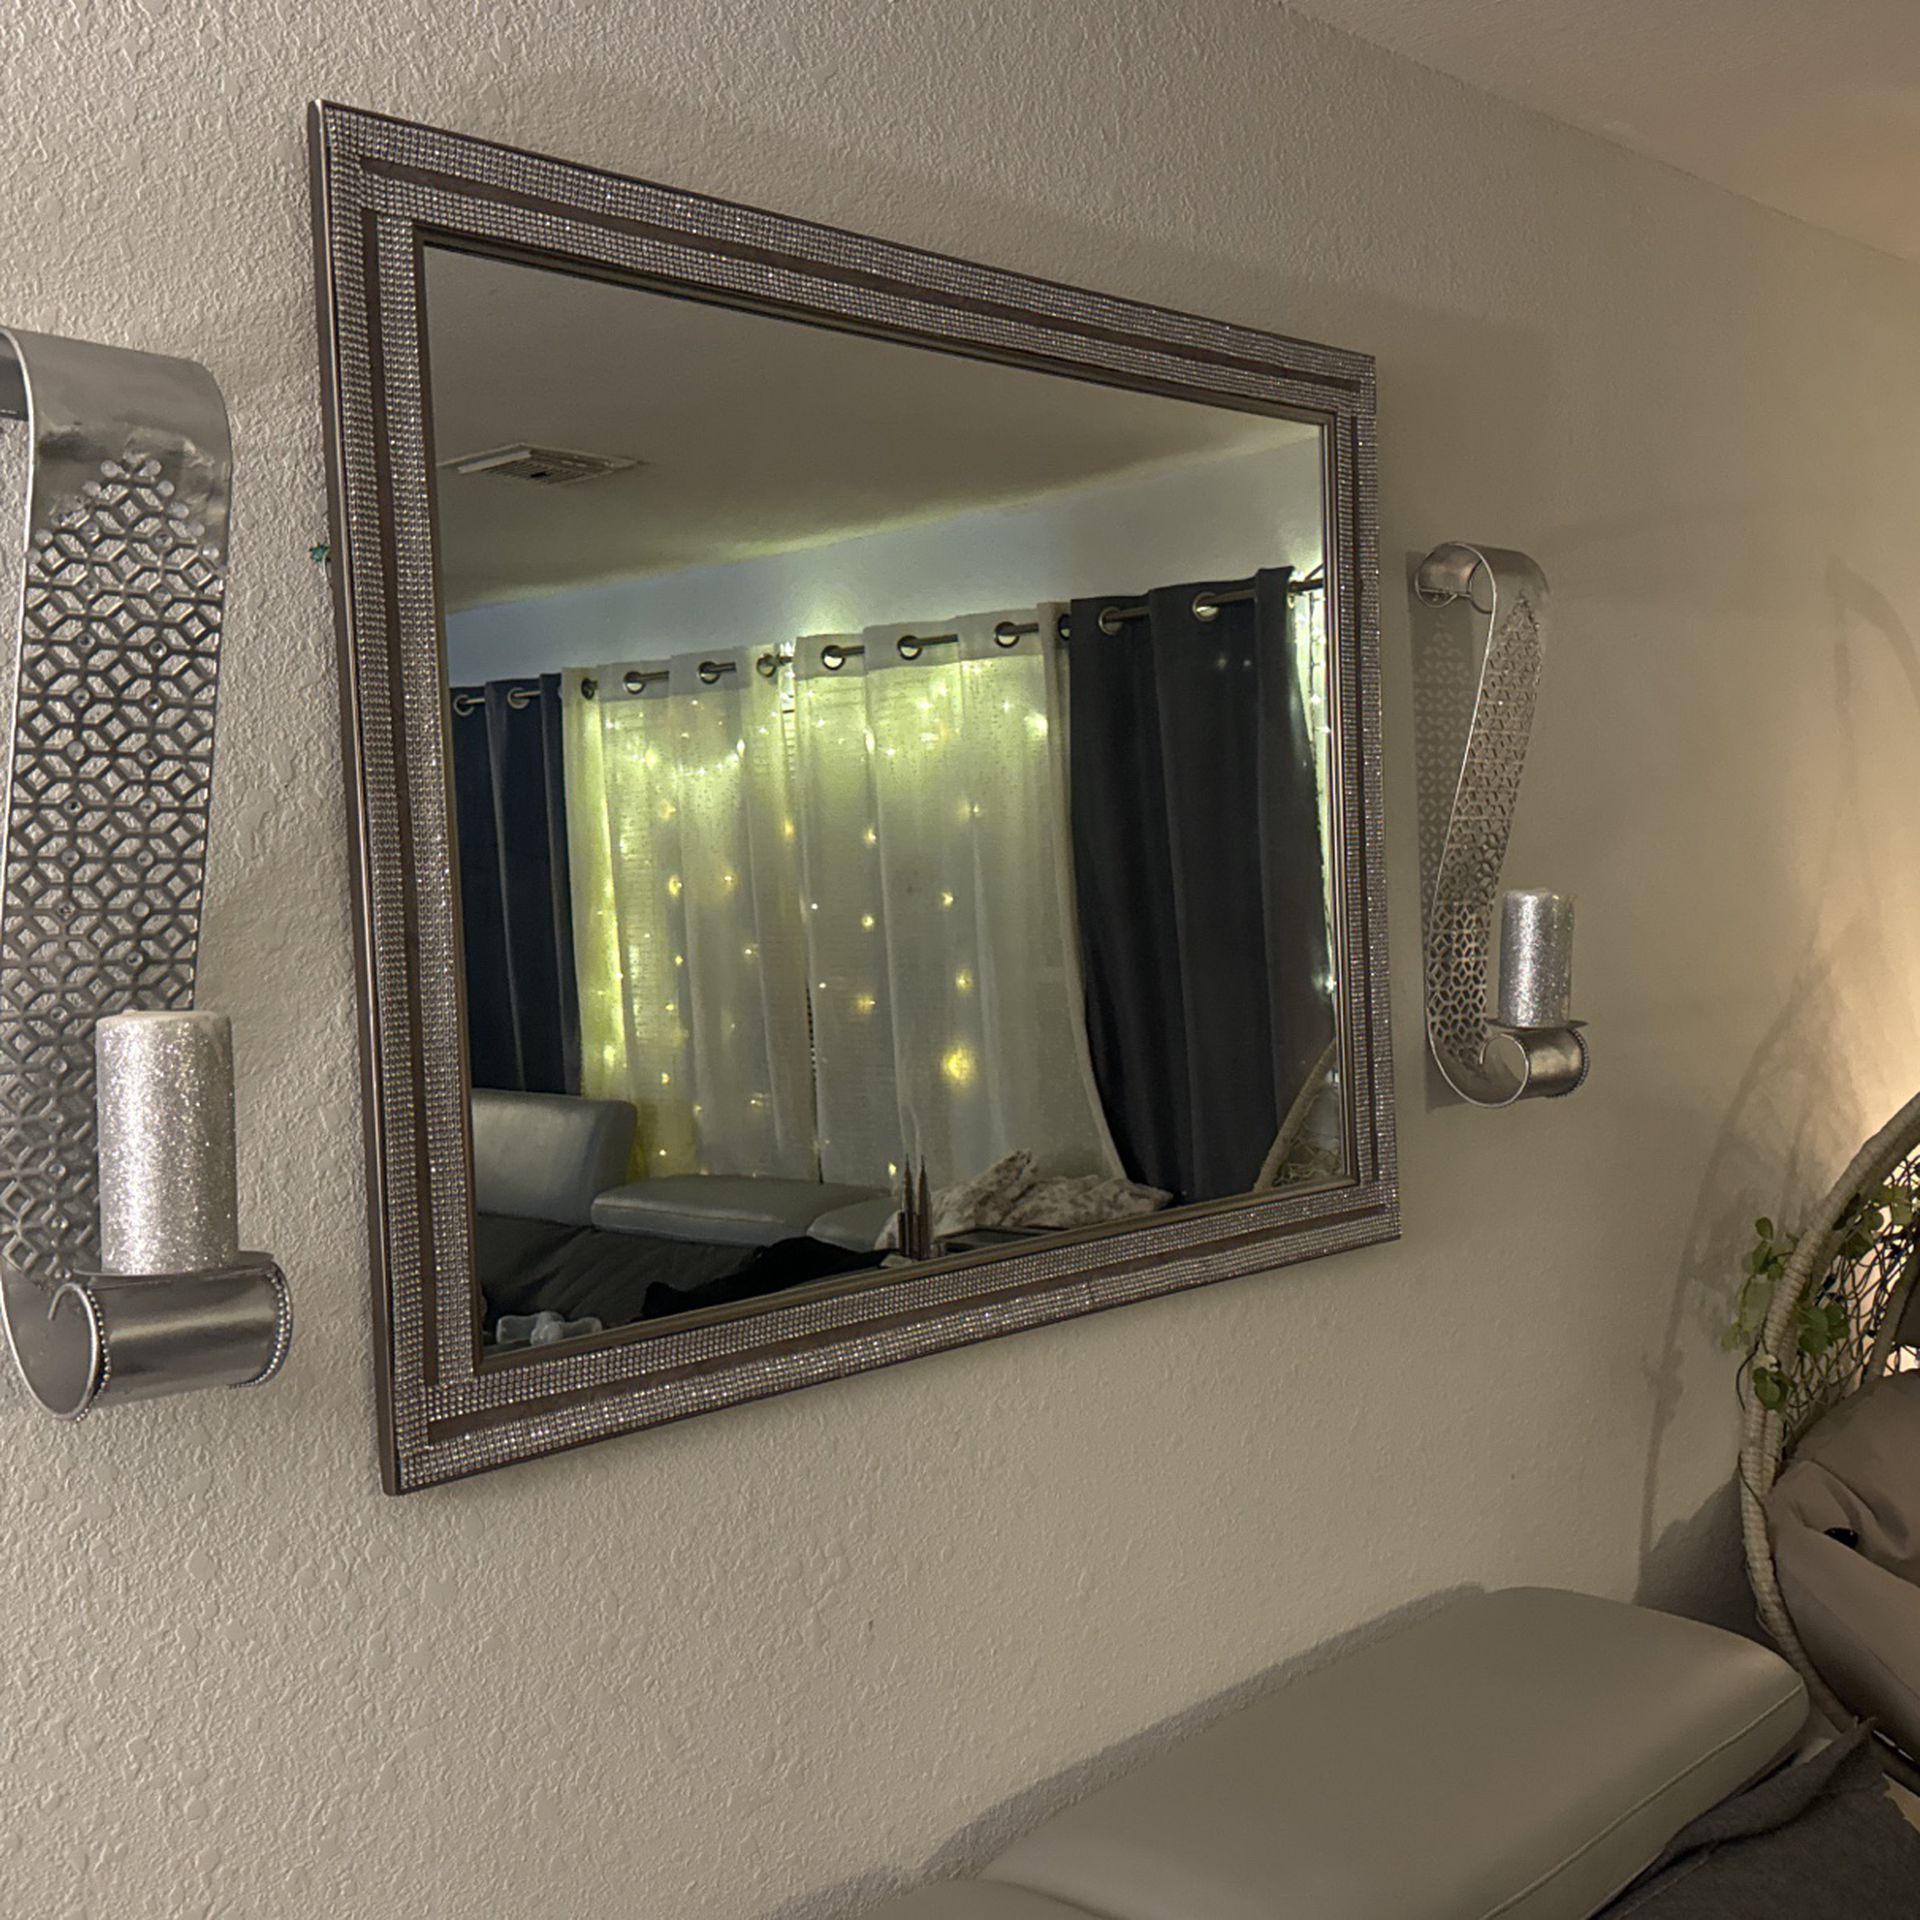 Wall mirror - 2 Candle Holders $45